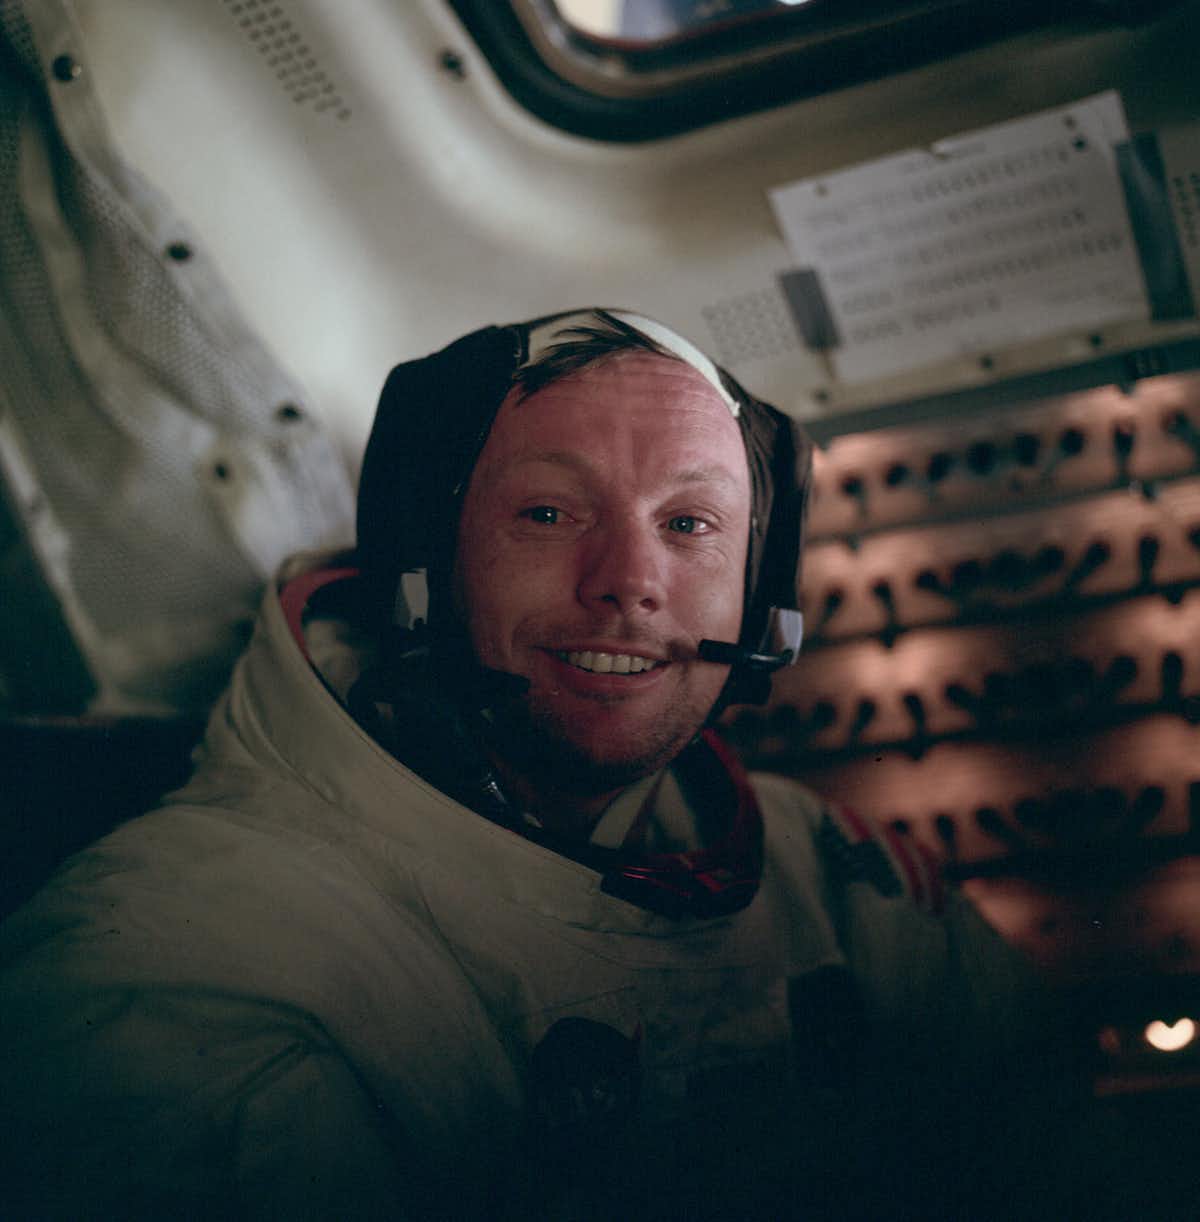 Apollo 11 commander Neil Armstrong back inside the lunar module on the Moon after the moonwalk. 